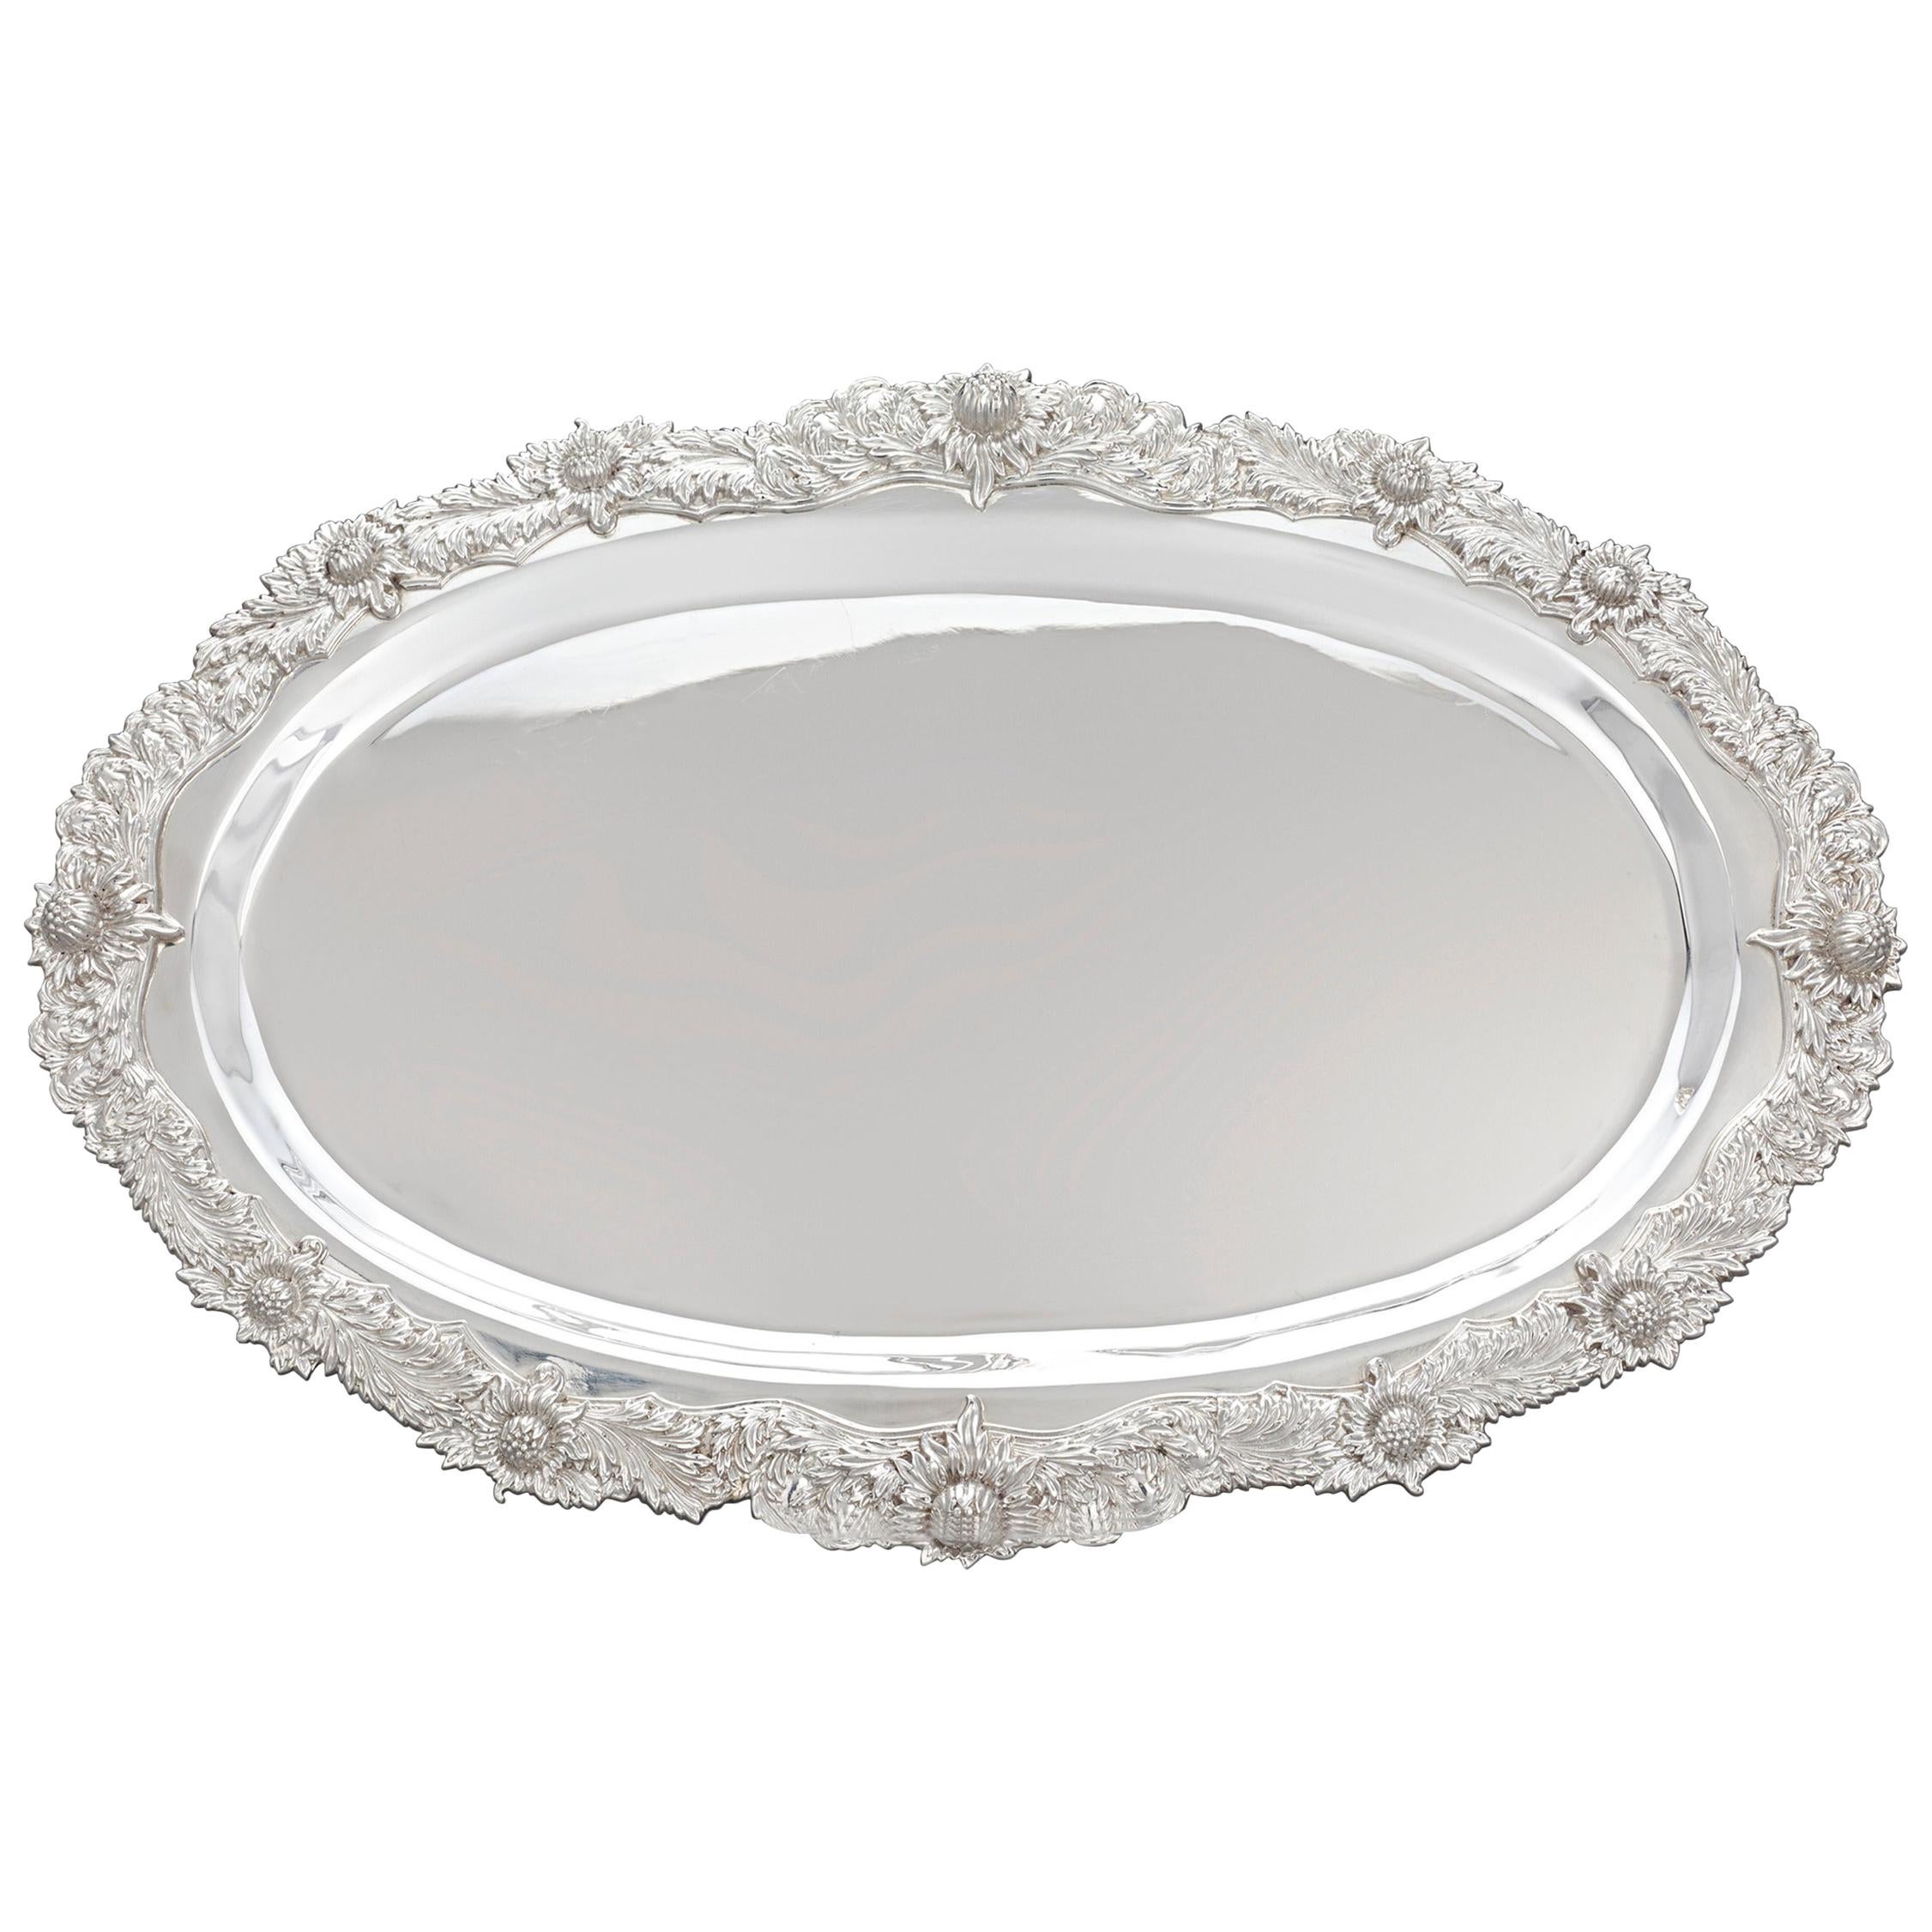 Chrysanthemum Sterling Silver Serving Tray by Tiffany & Co.